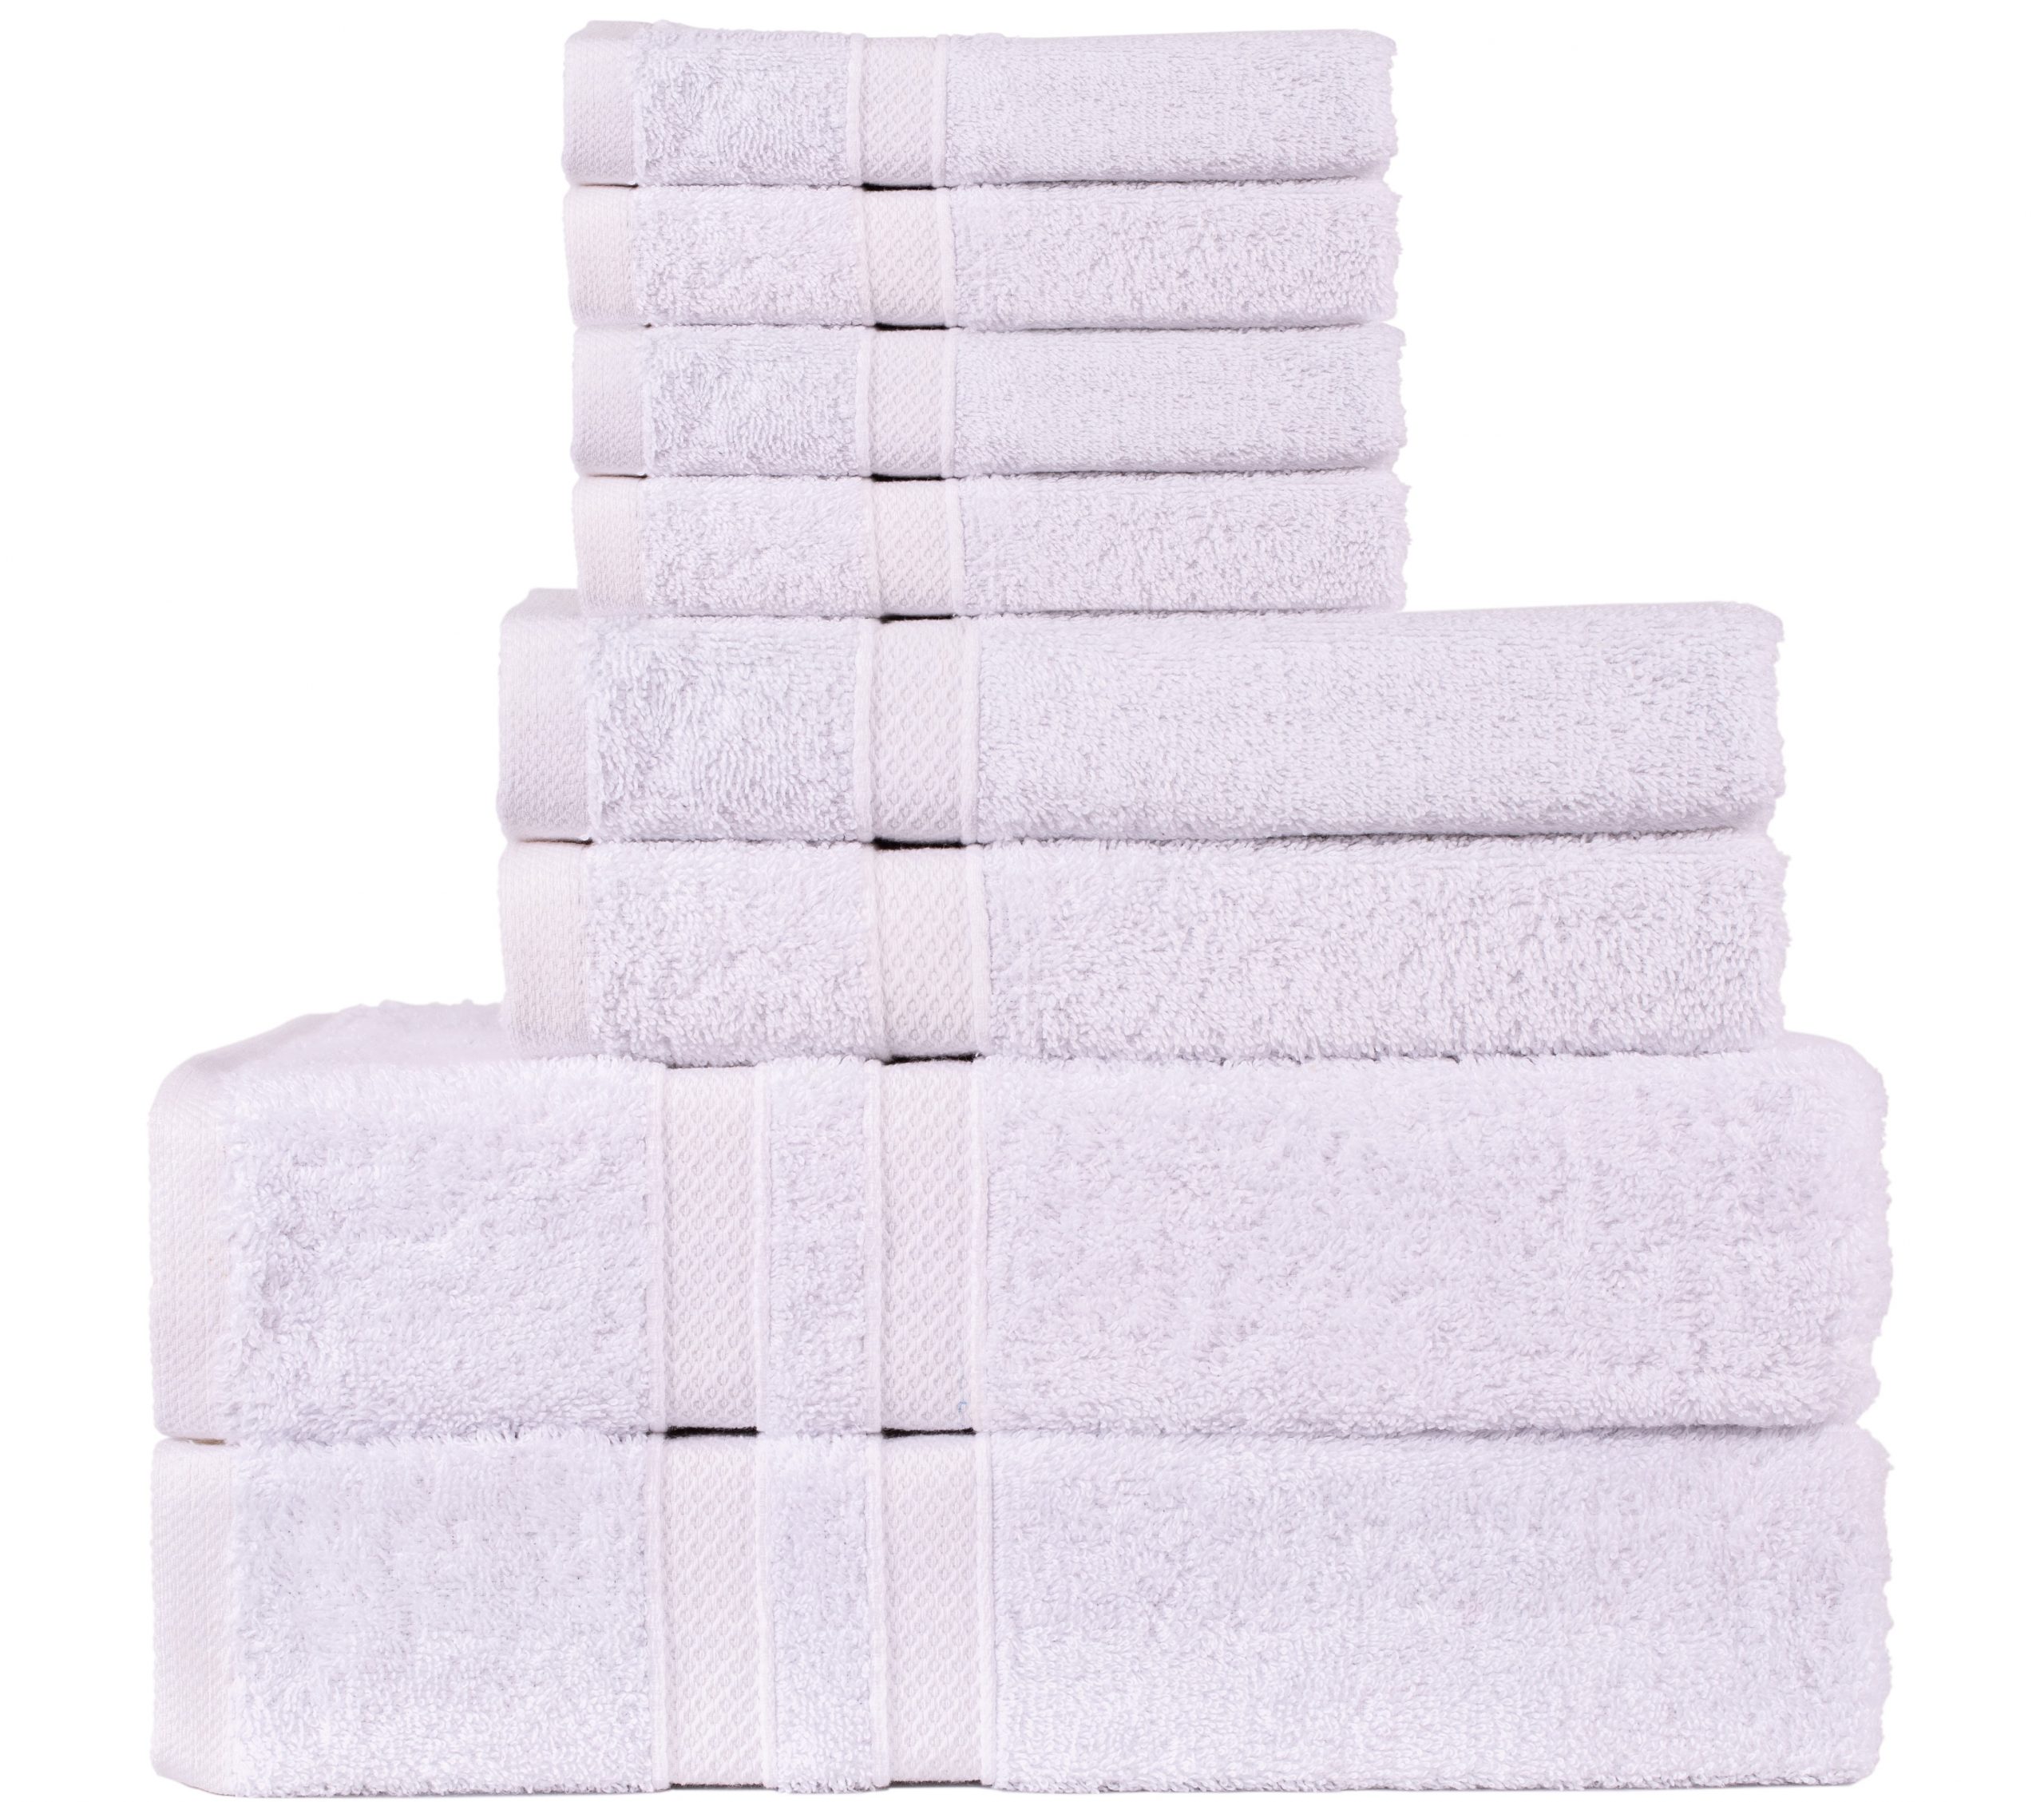 100% Ring Spun Cotton Washcloths Extra Soft 8 Pack Highly Absorbent 